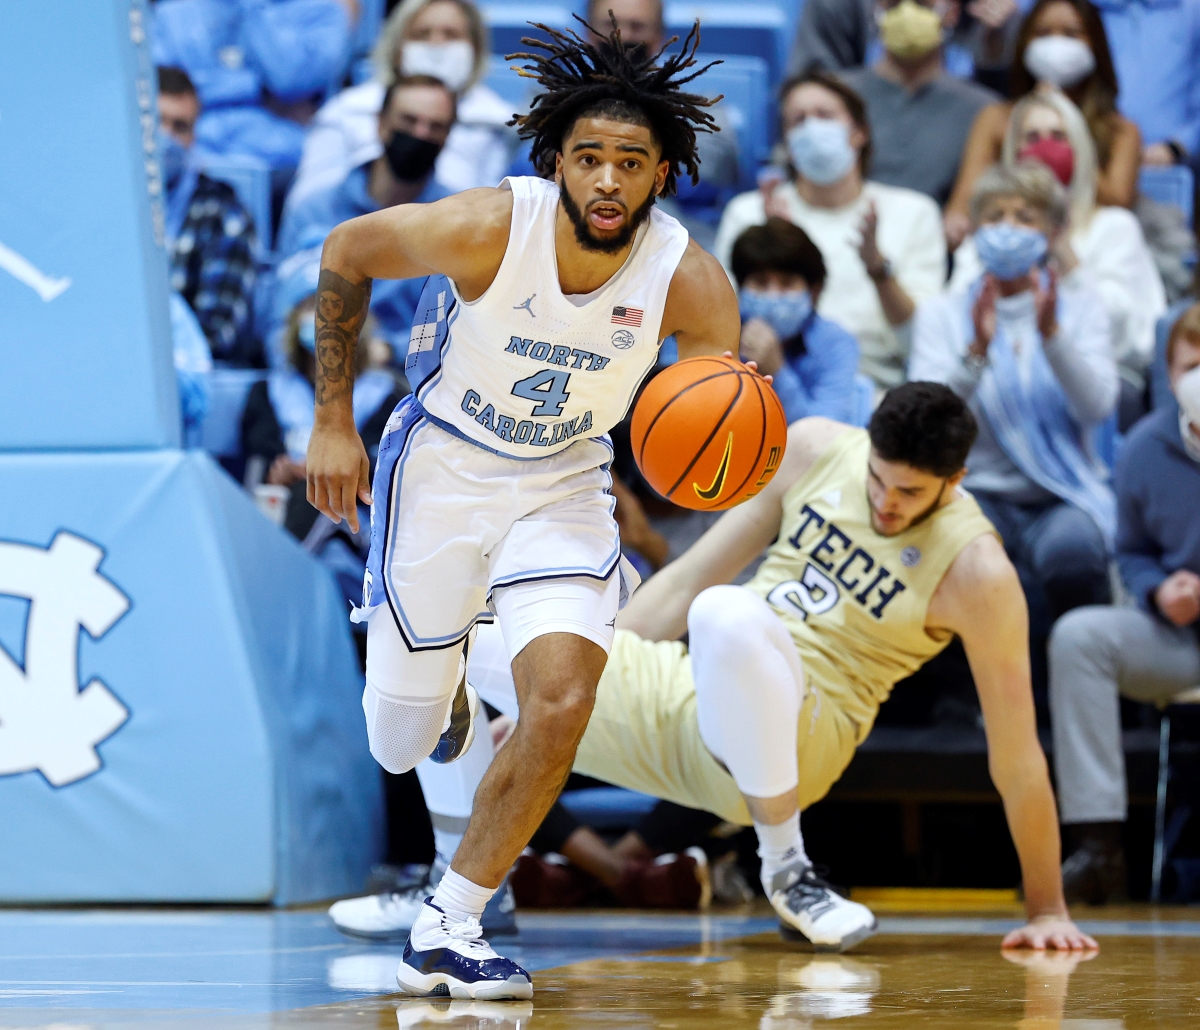 RJ Davis will need to be the key if UNC is going to make a run at this year's college basketball title.